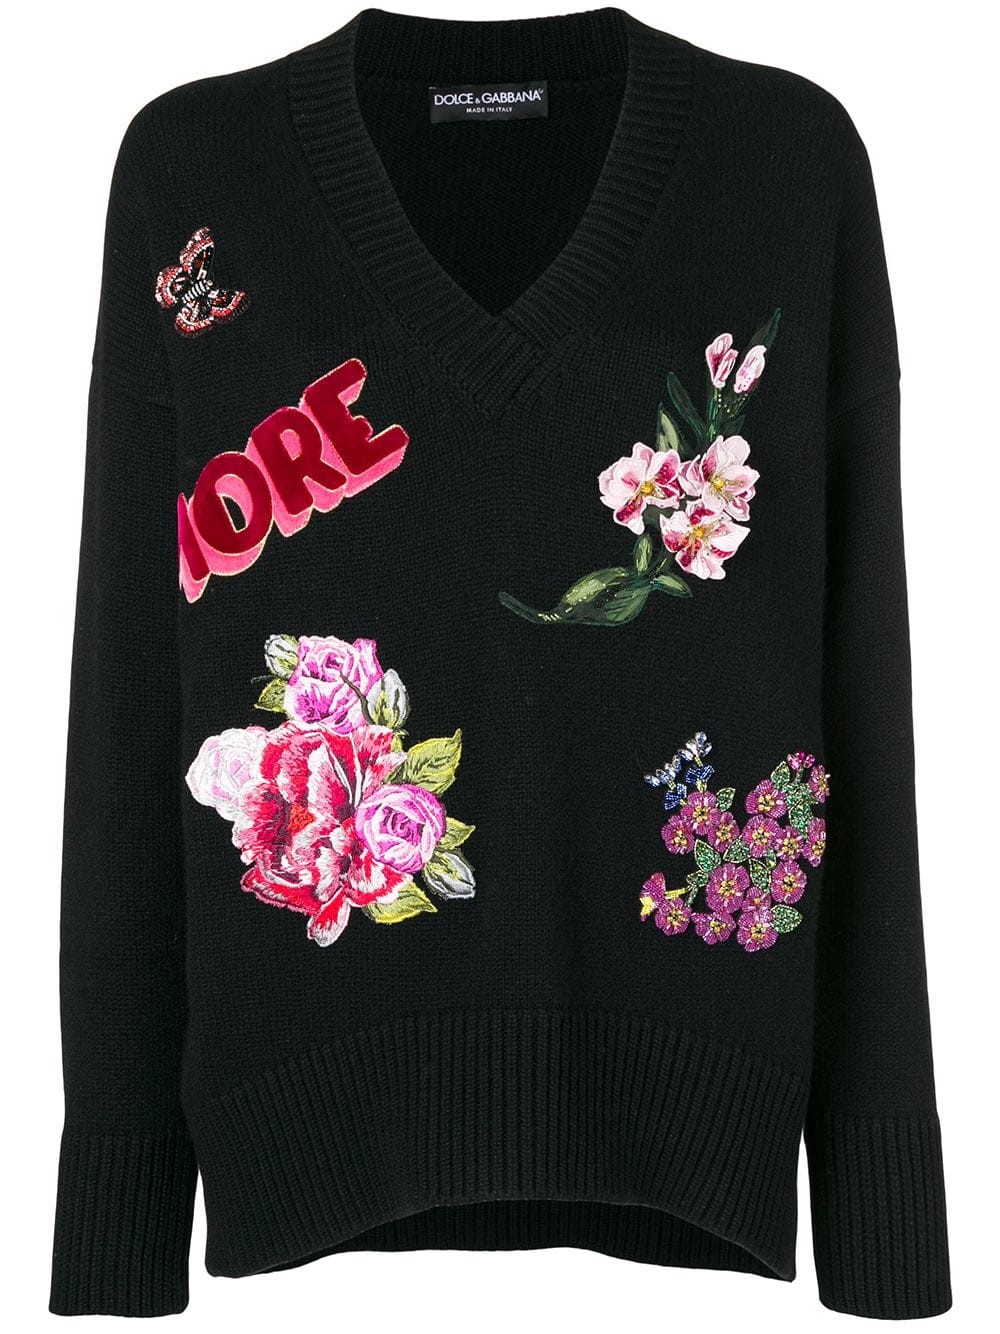 dolce & gabbana AMORE SWEATER available on montiboutique.com - 24789